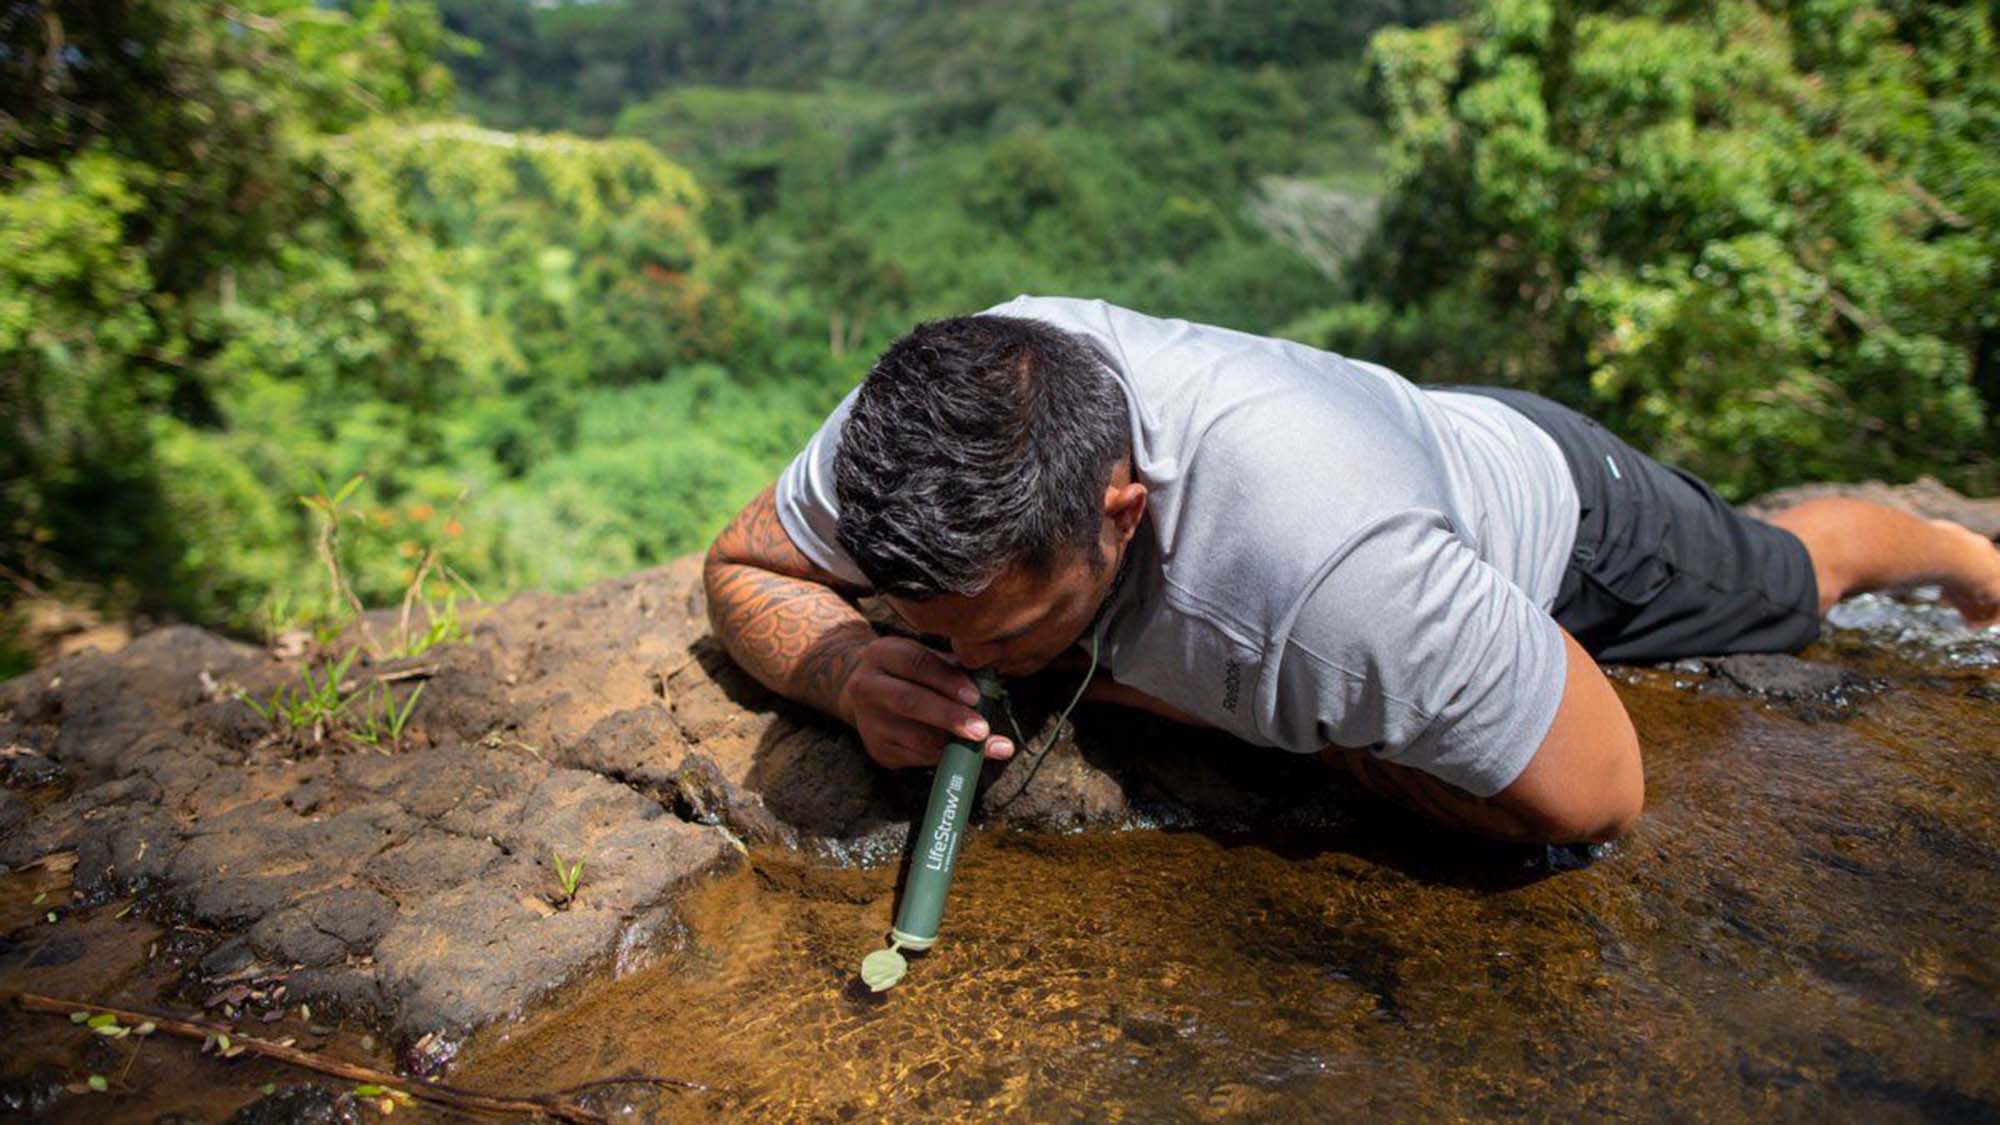 Systeme Filtration Mission 5 Litres Lifestraw